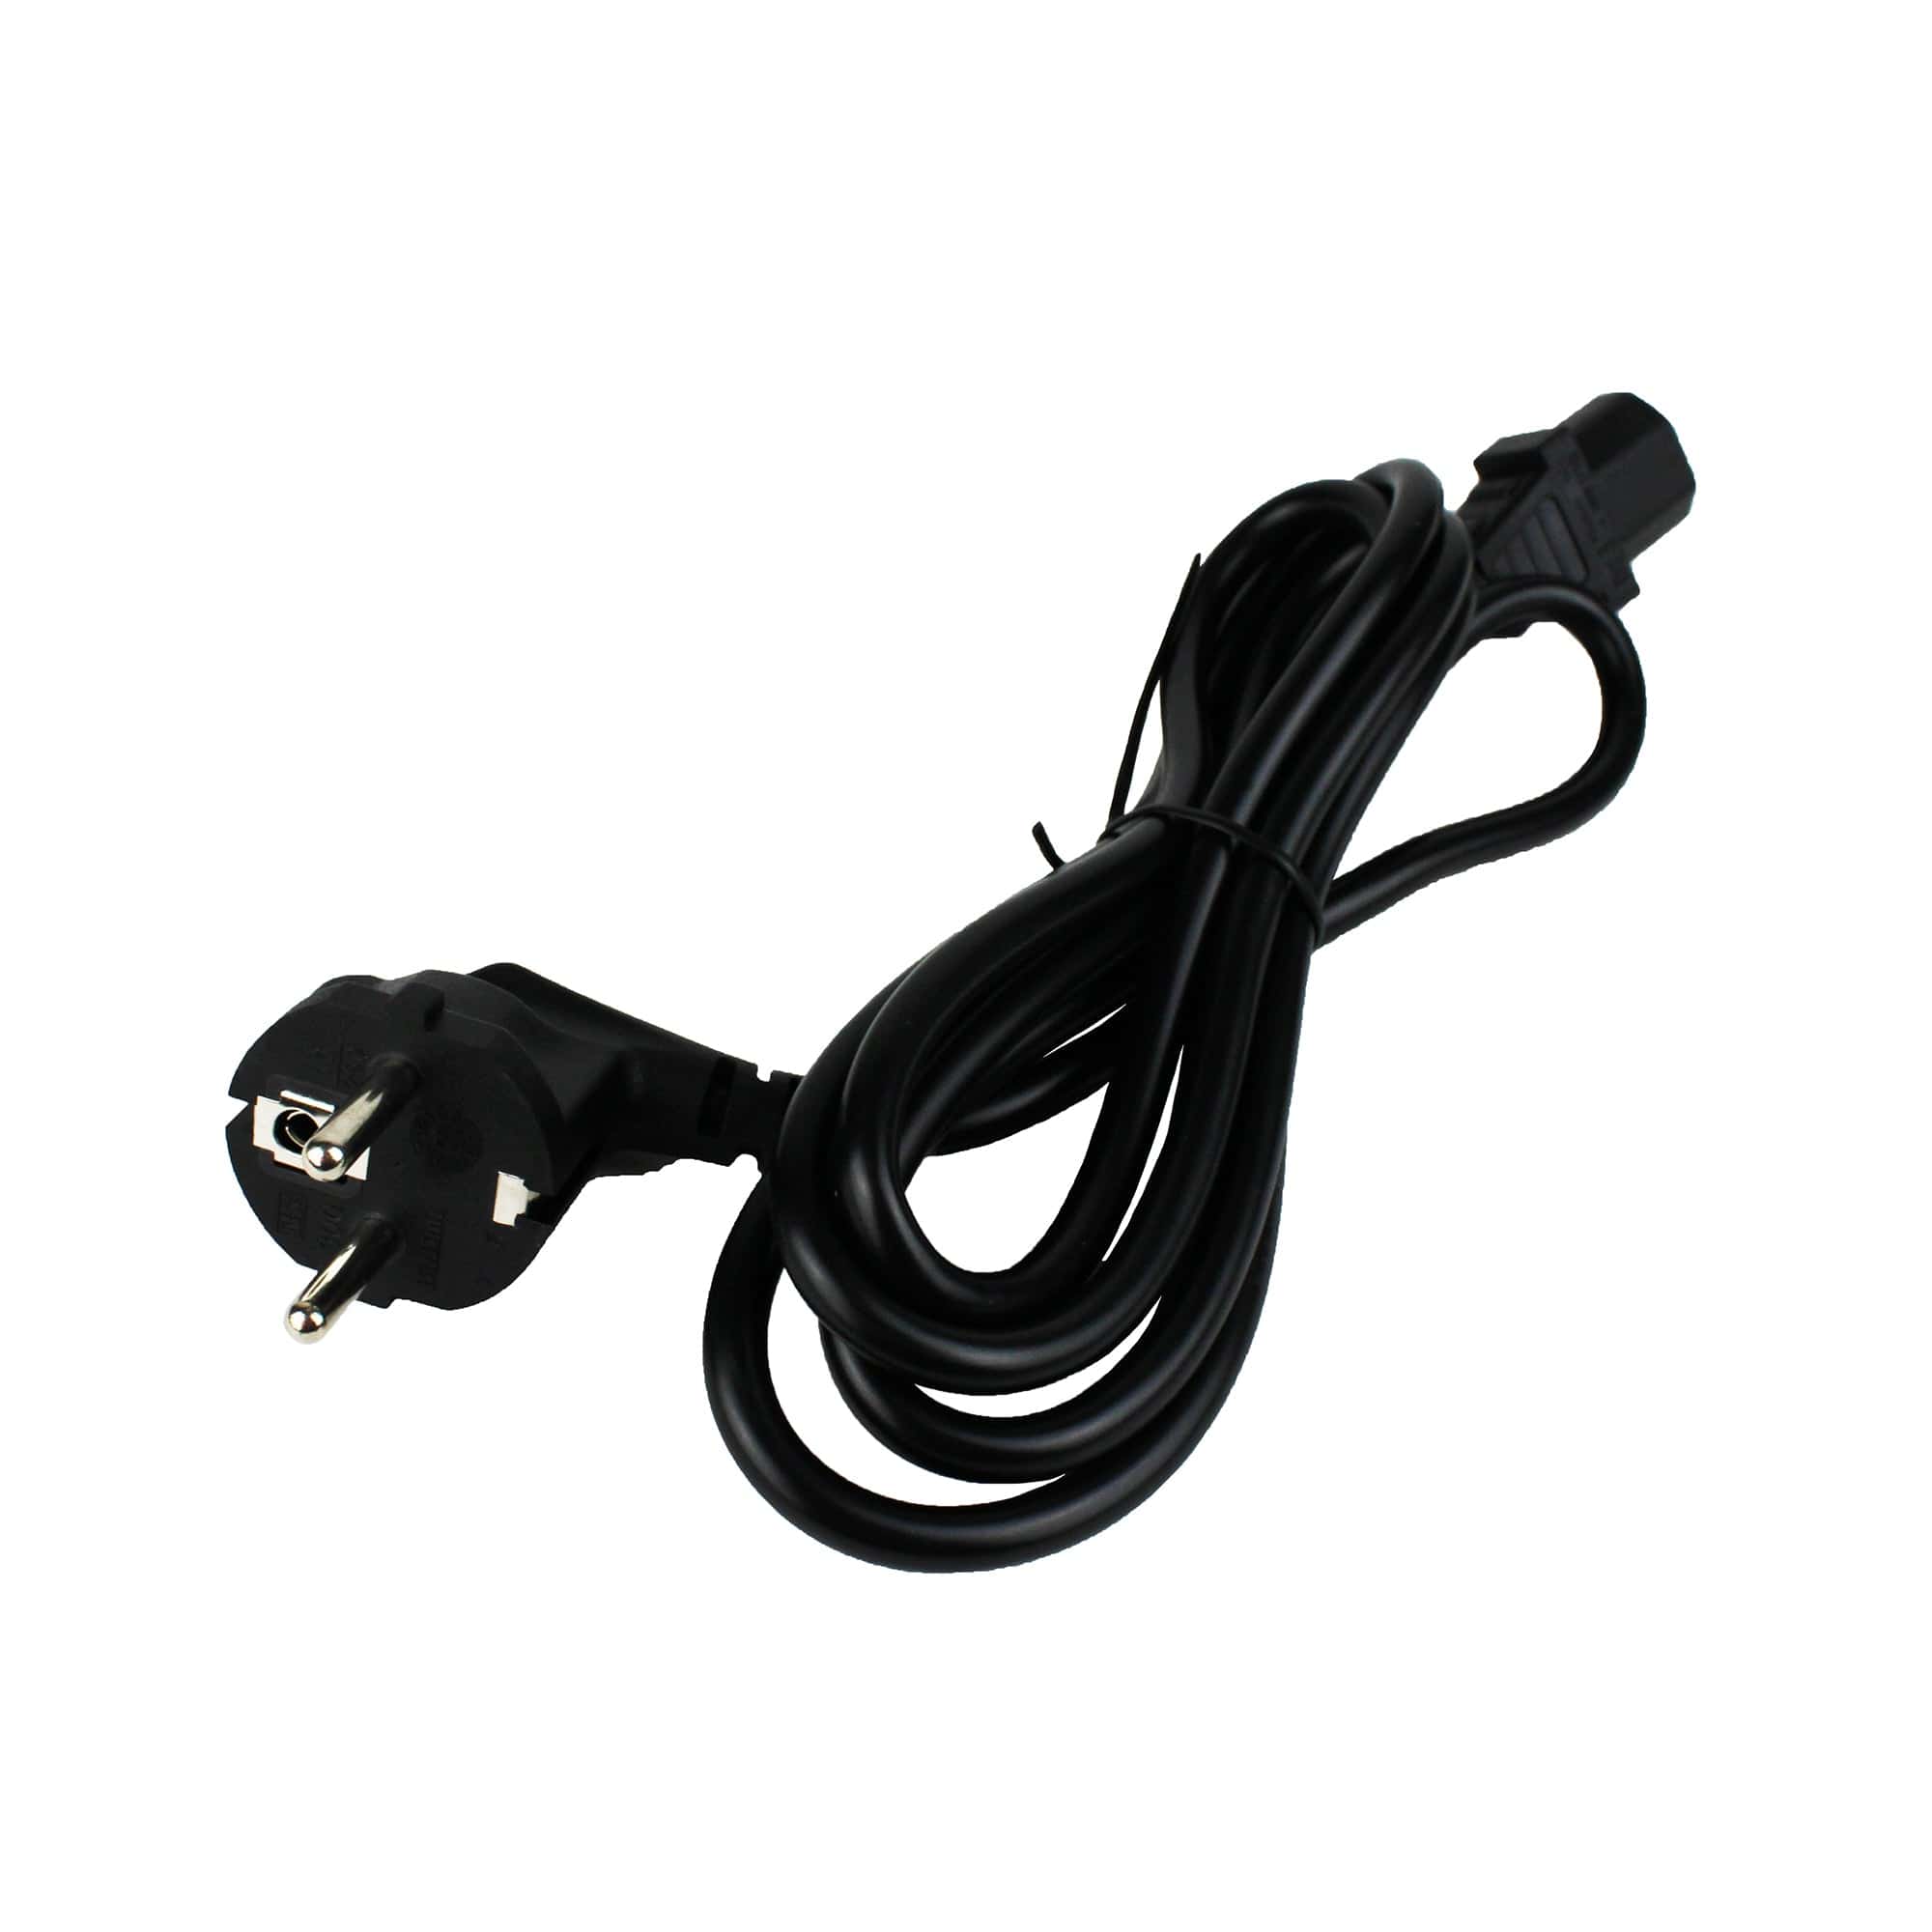 12V Power Cord  Buy a Dometic 12V Refrigerator Power Cord for CF & CDF  Boxes - Boat & RV Accessories